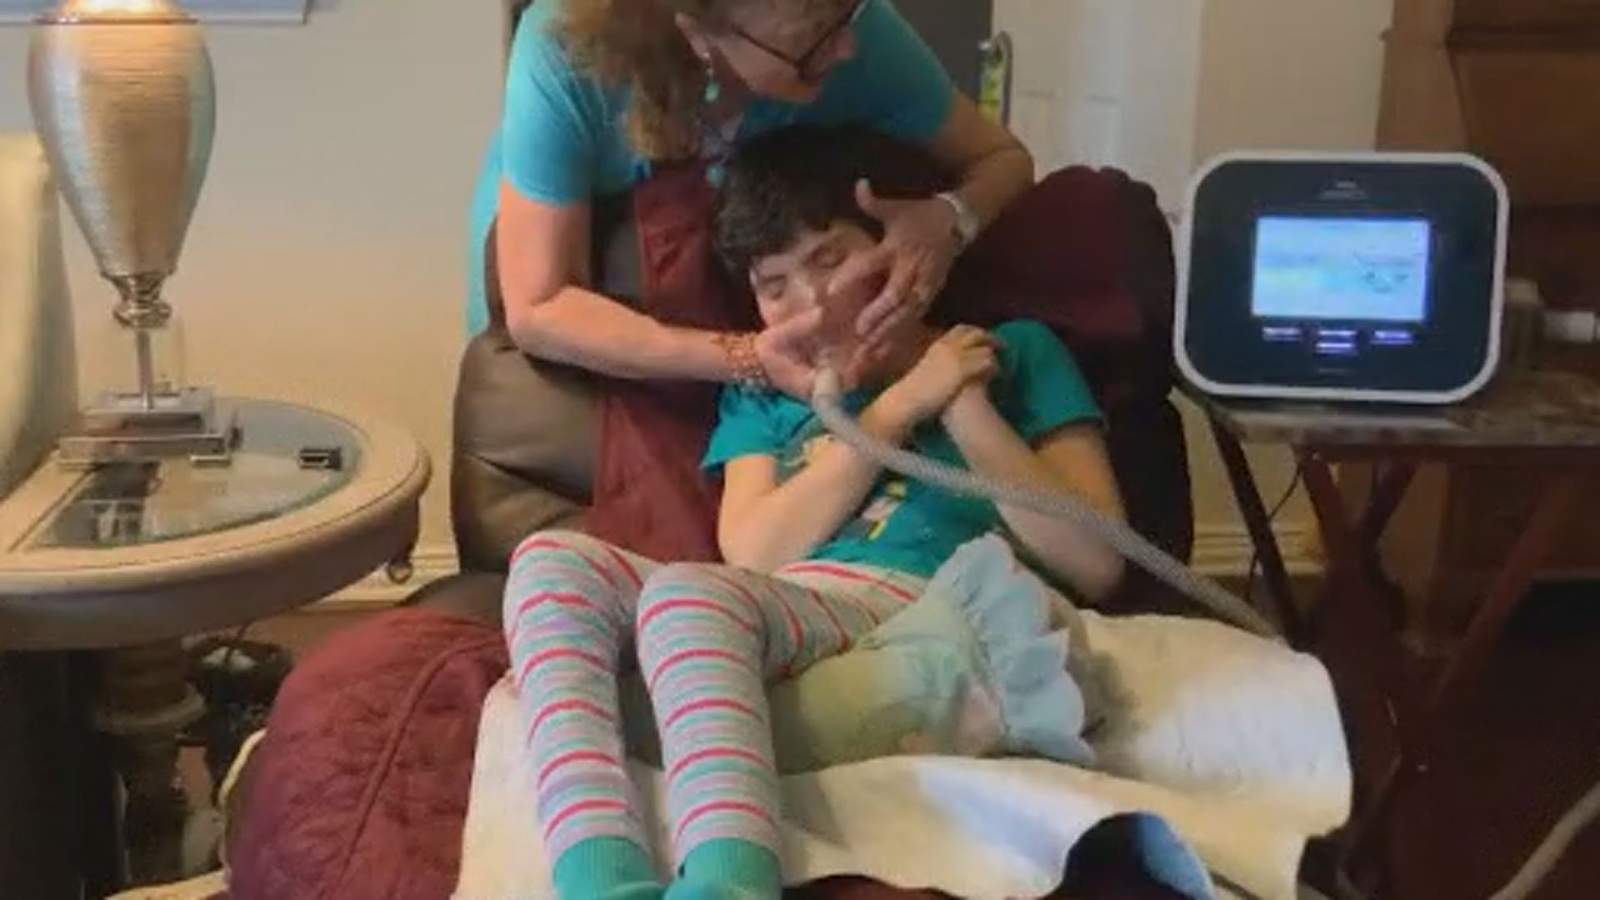 Not much help for special needs Texans who need electricity to live - so what is next?